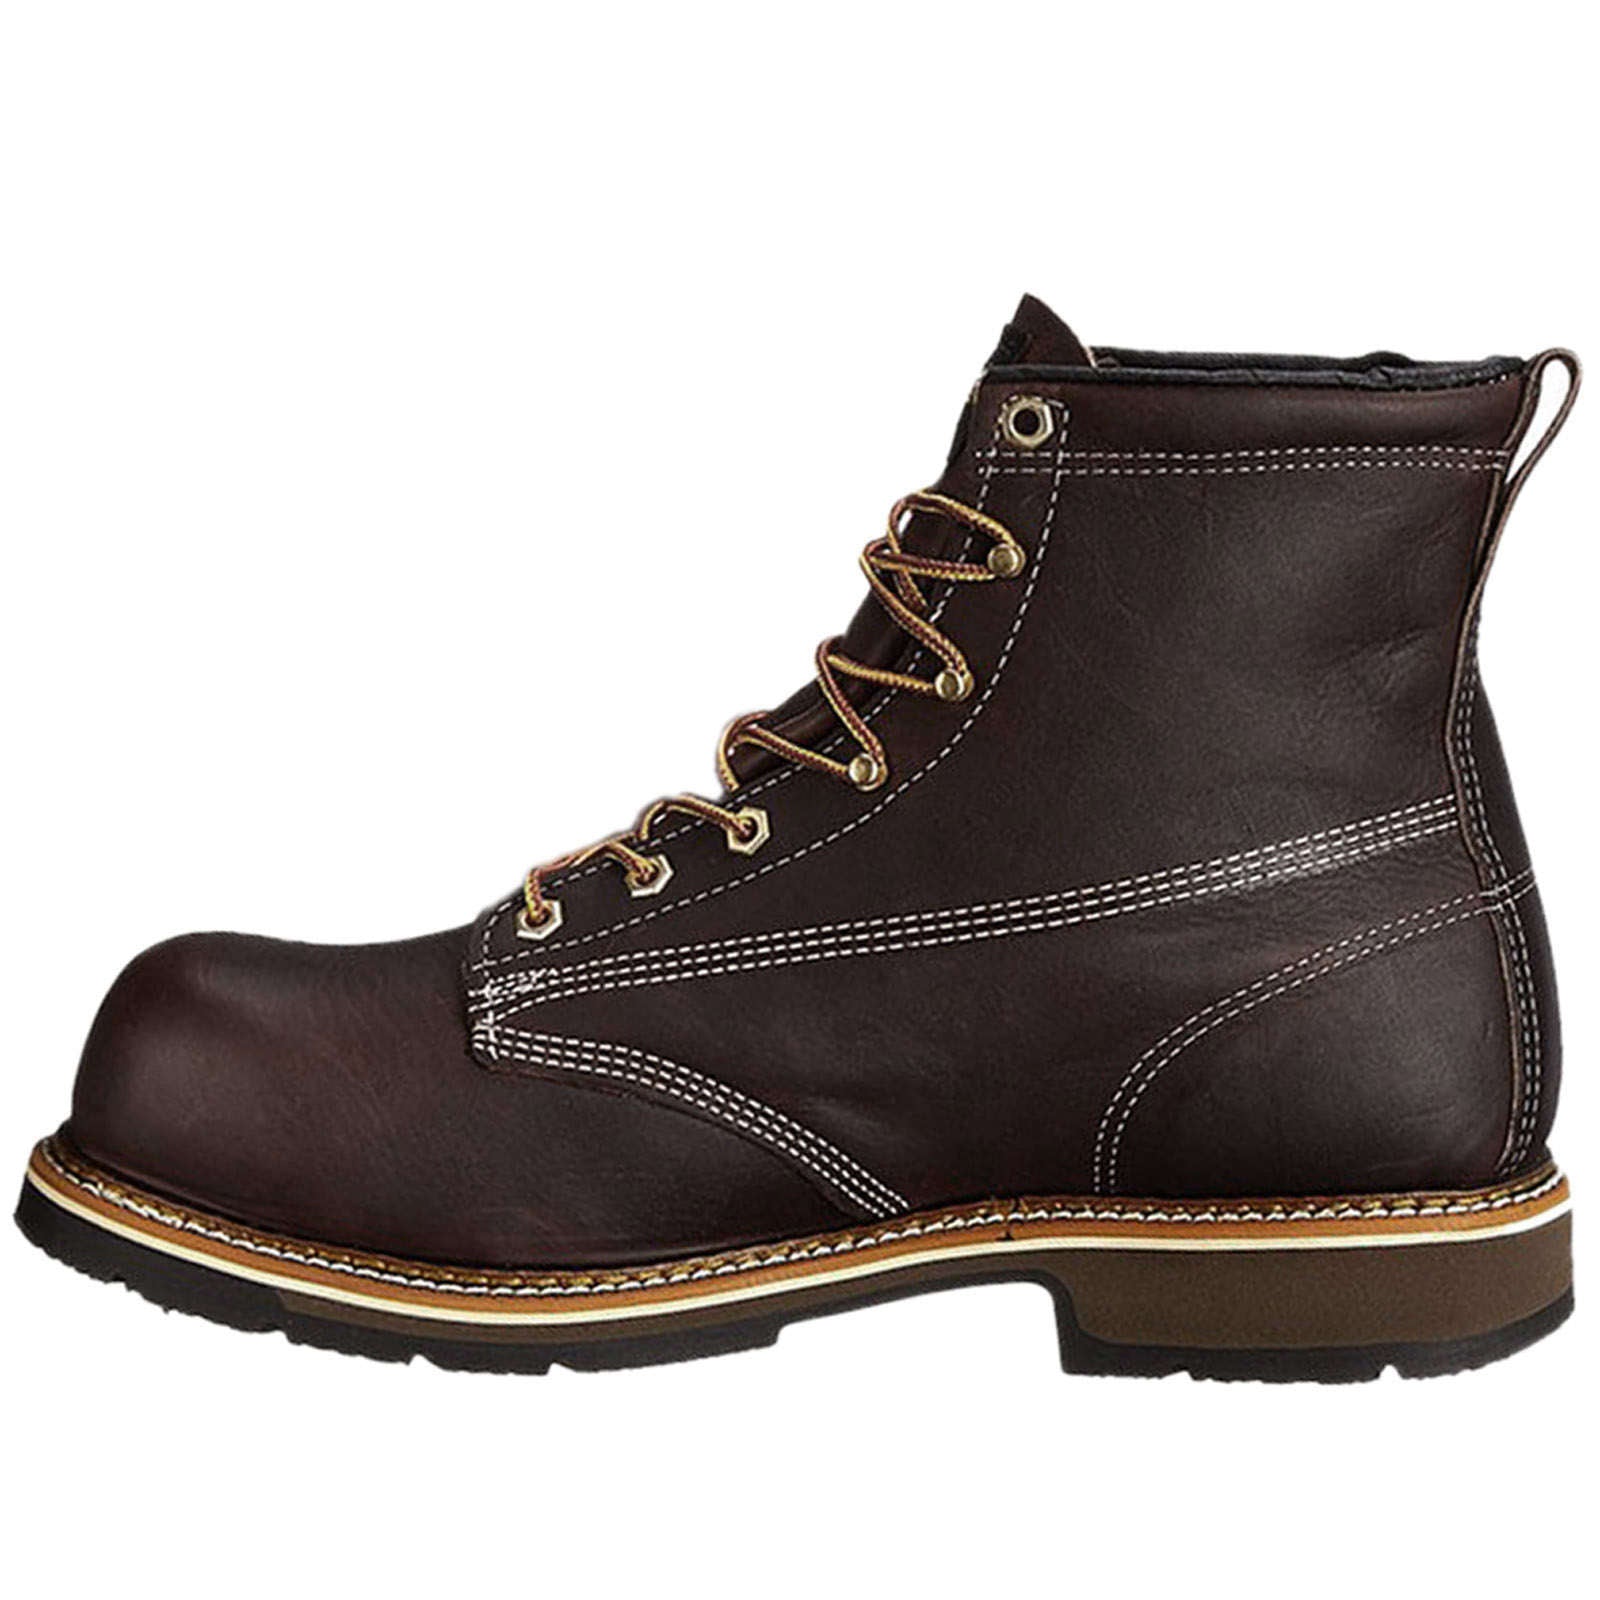 Thorogood American Heritage 6 Inch Plain Toe Men's Safety Toe Boots#color_black walnut